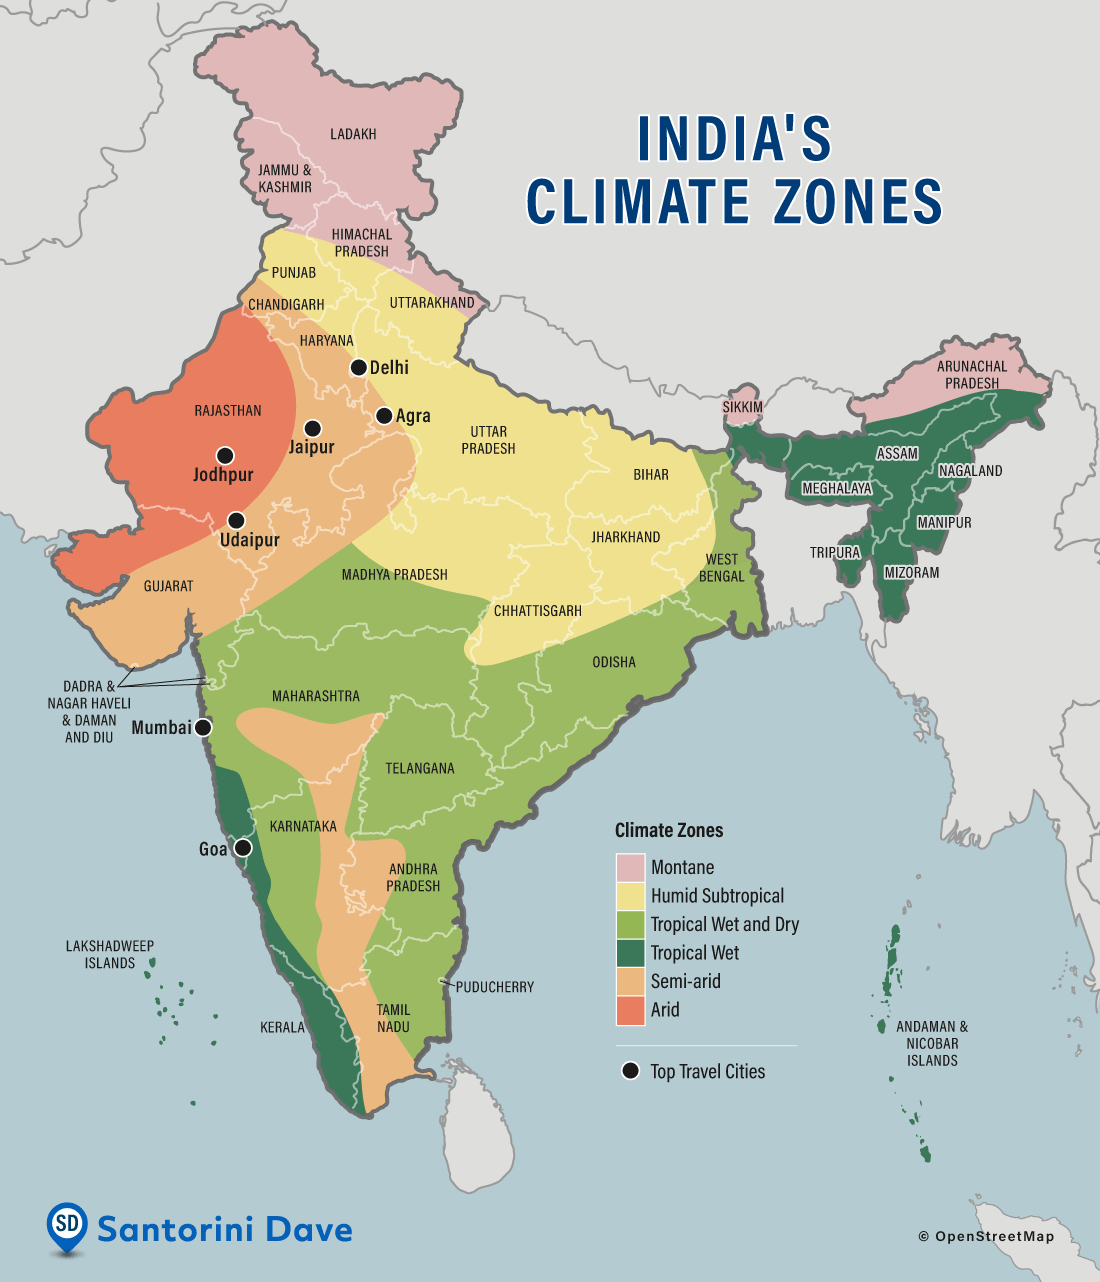 Climate zones in India.